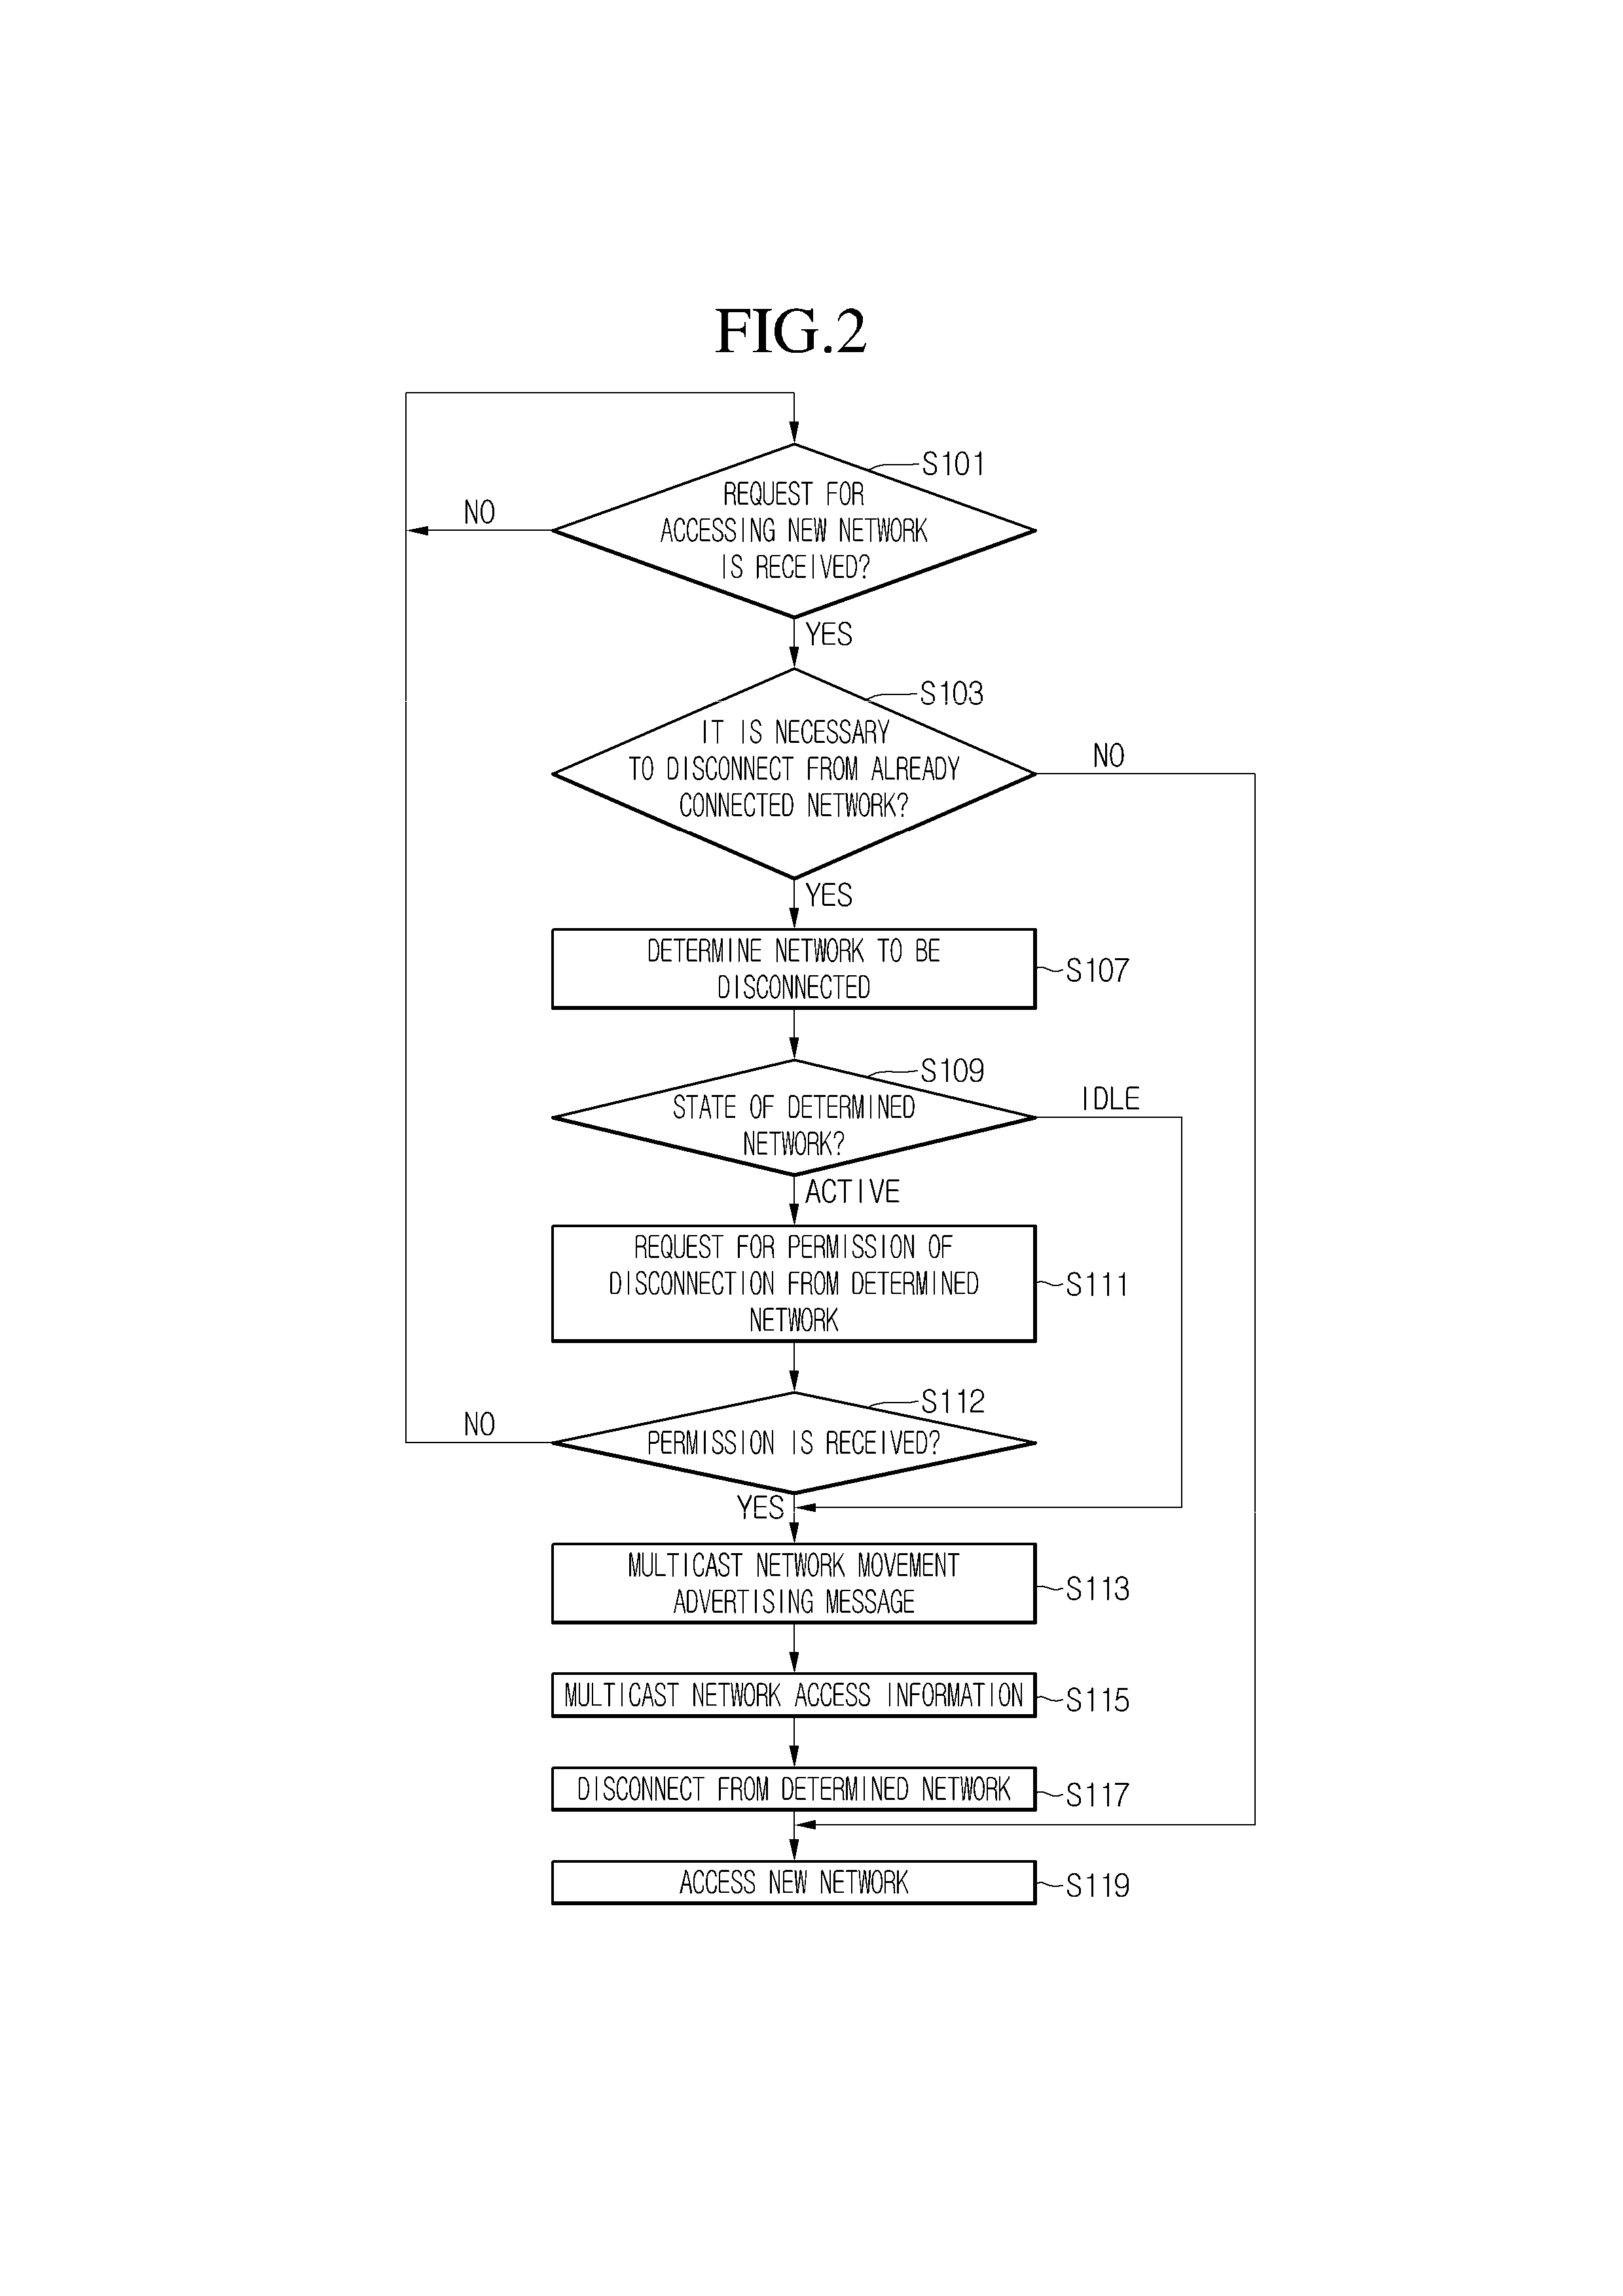 Control apparatus, control target apparatus, and method for operating the control, apparatus and the control target apparatus in multiple networks